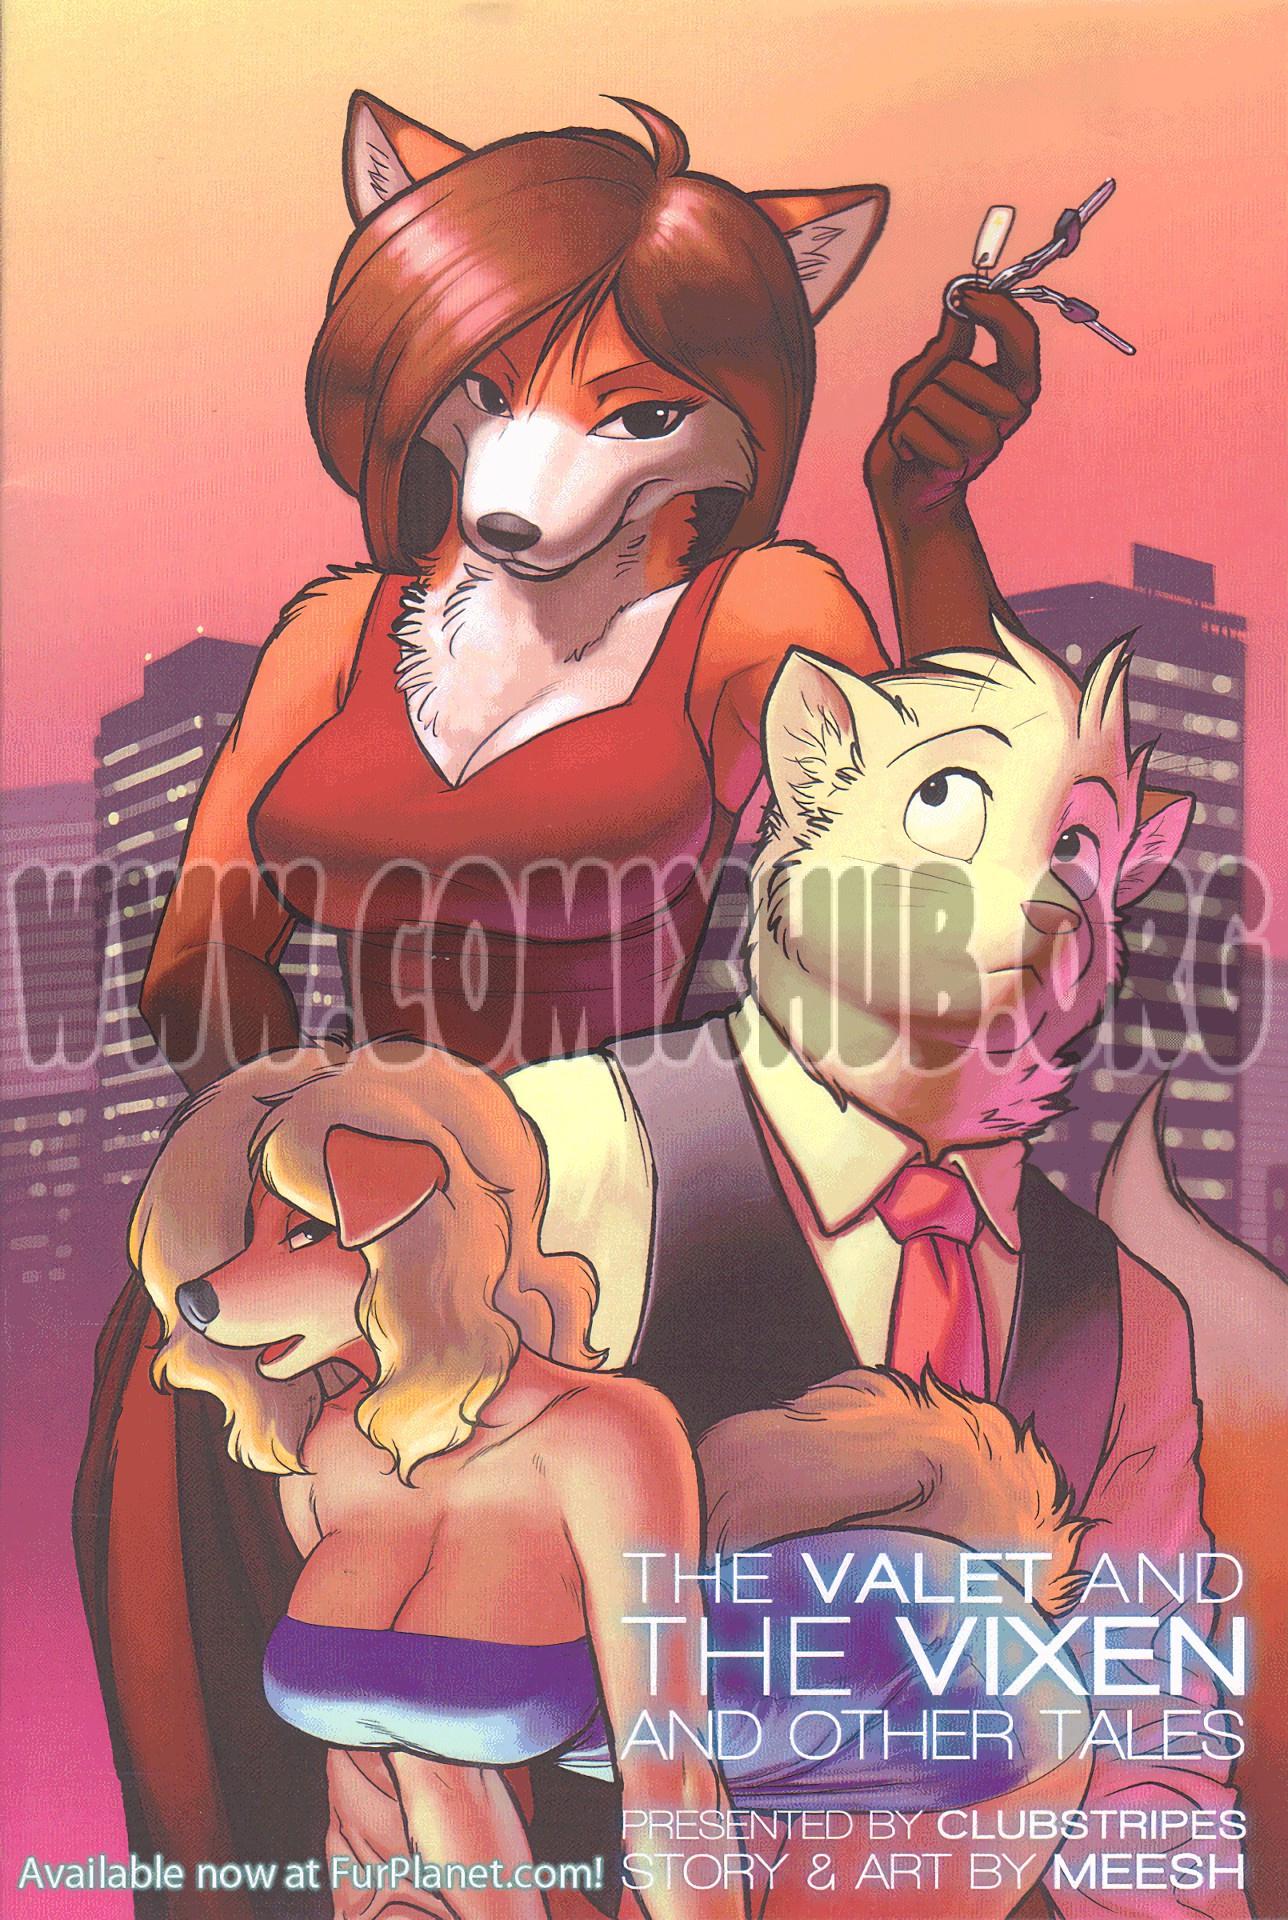 The Valet and The Vixen and Other Tales Oral sex, Blowjob, Creampie, Cum Swallow, cunnilingus, Deepthroat, Furry, Masturbation, Straight, Titfuck